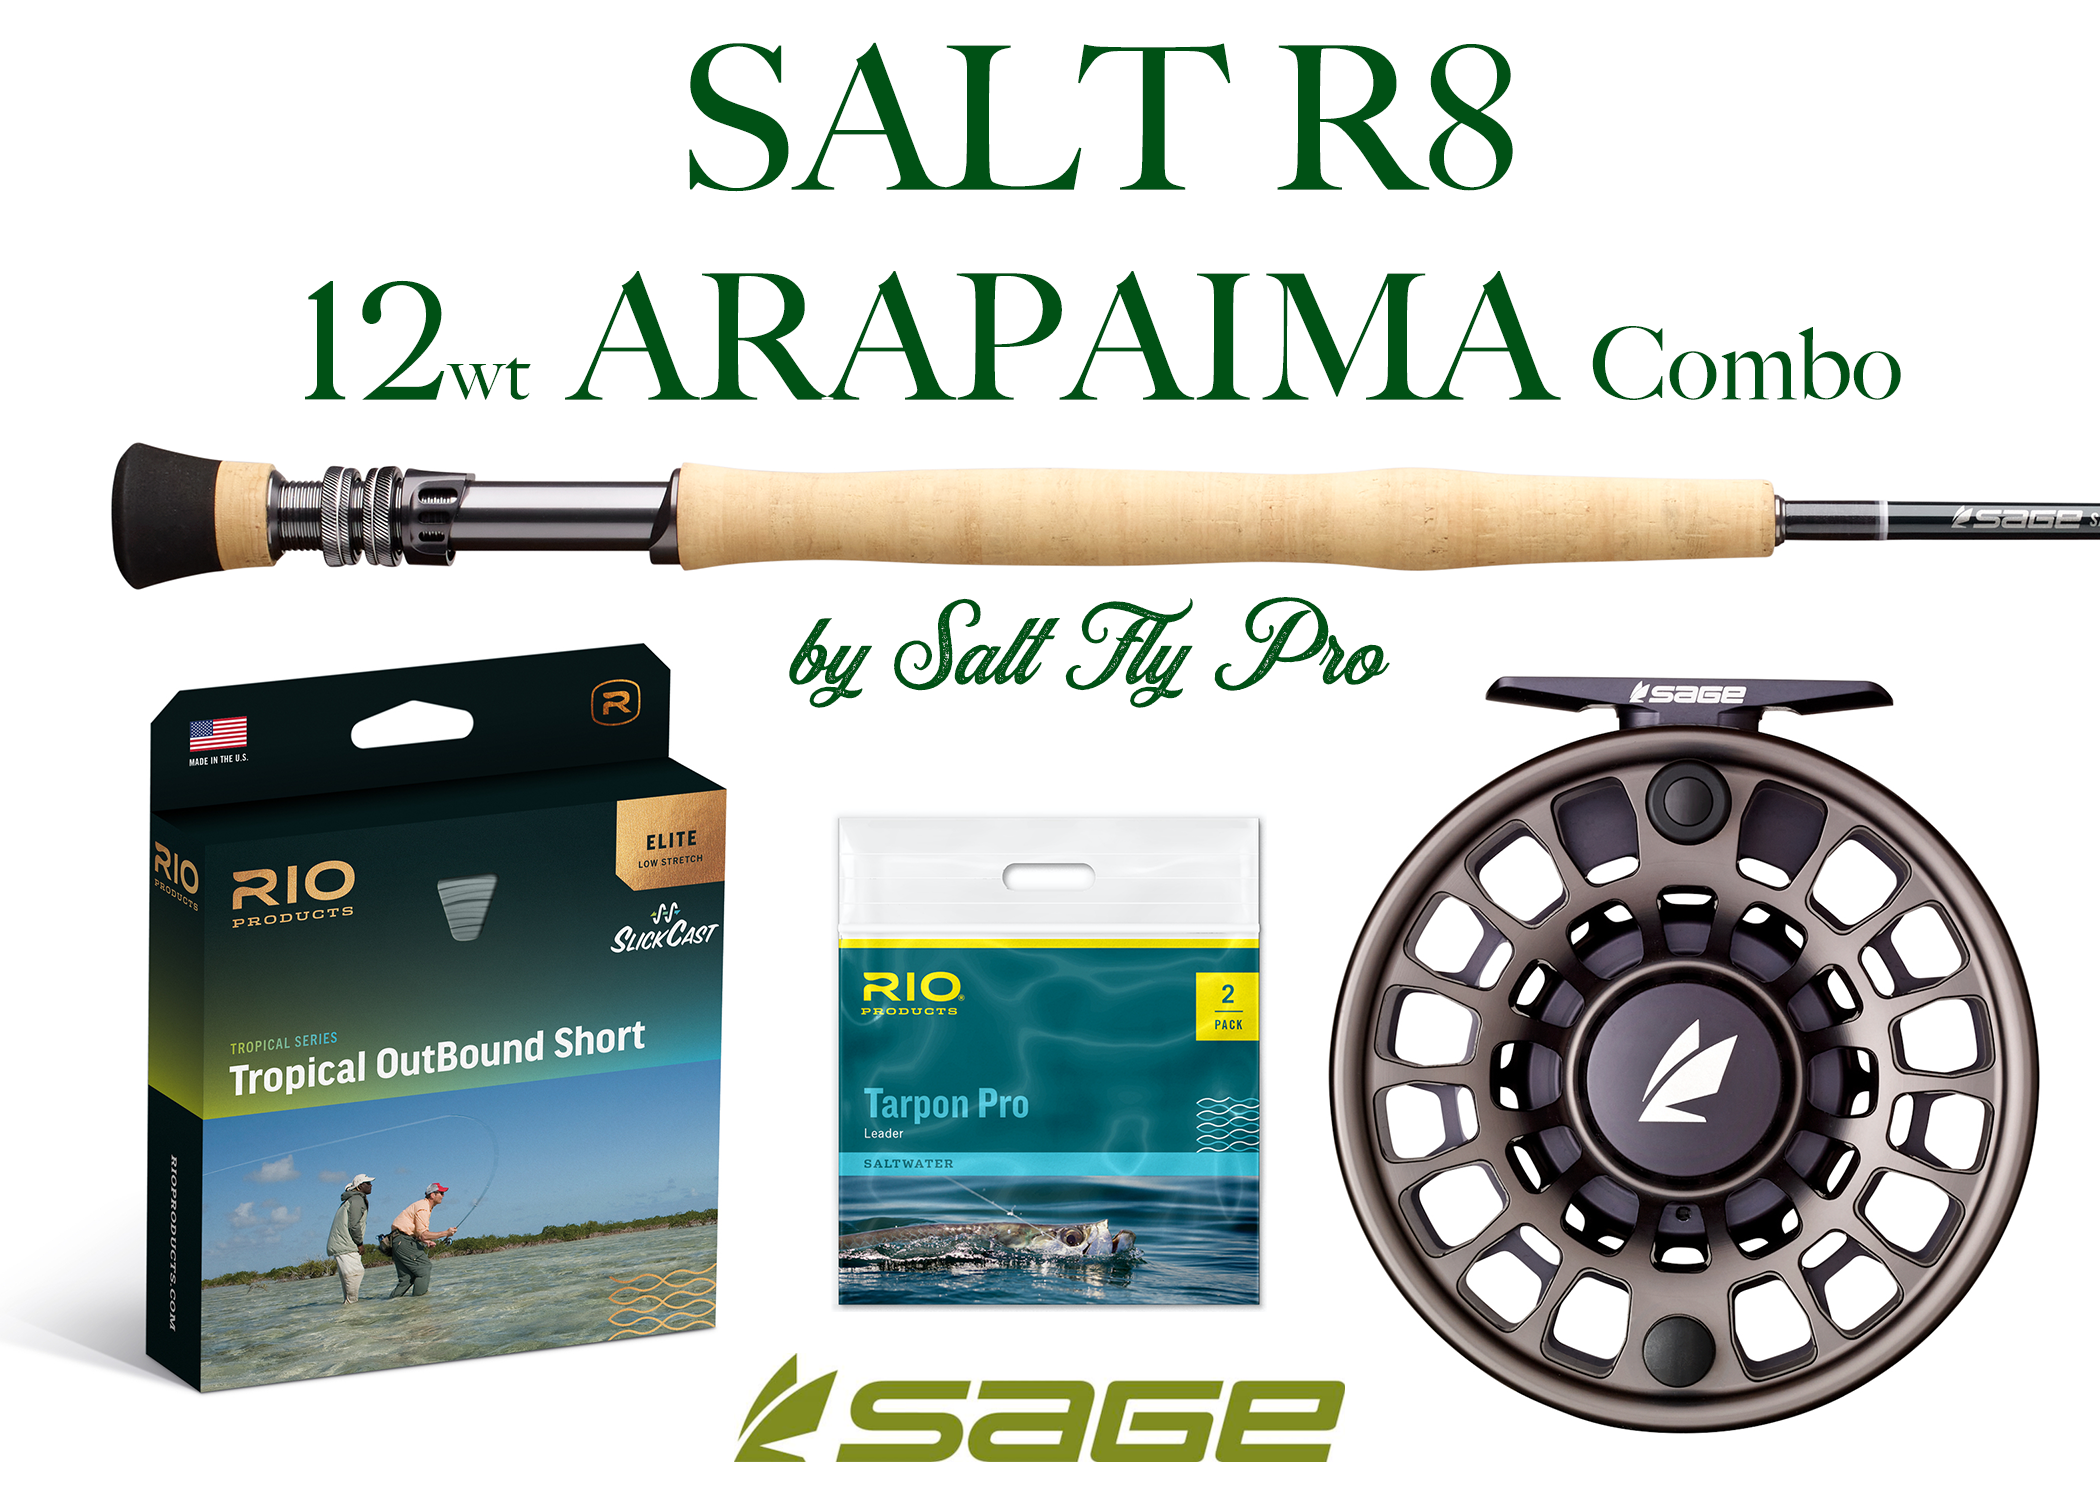 Sage SALT R8 12wt ARAPAIMA Jungle Fly Rod Combo Outfit - NEW!